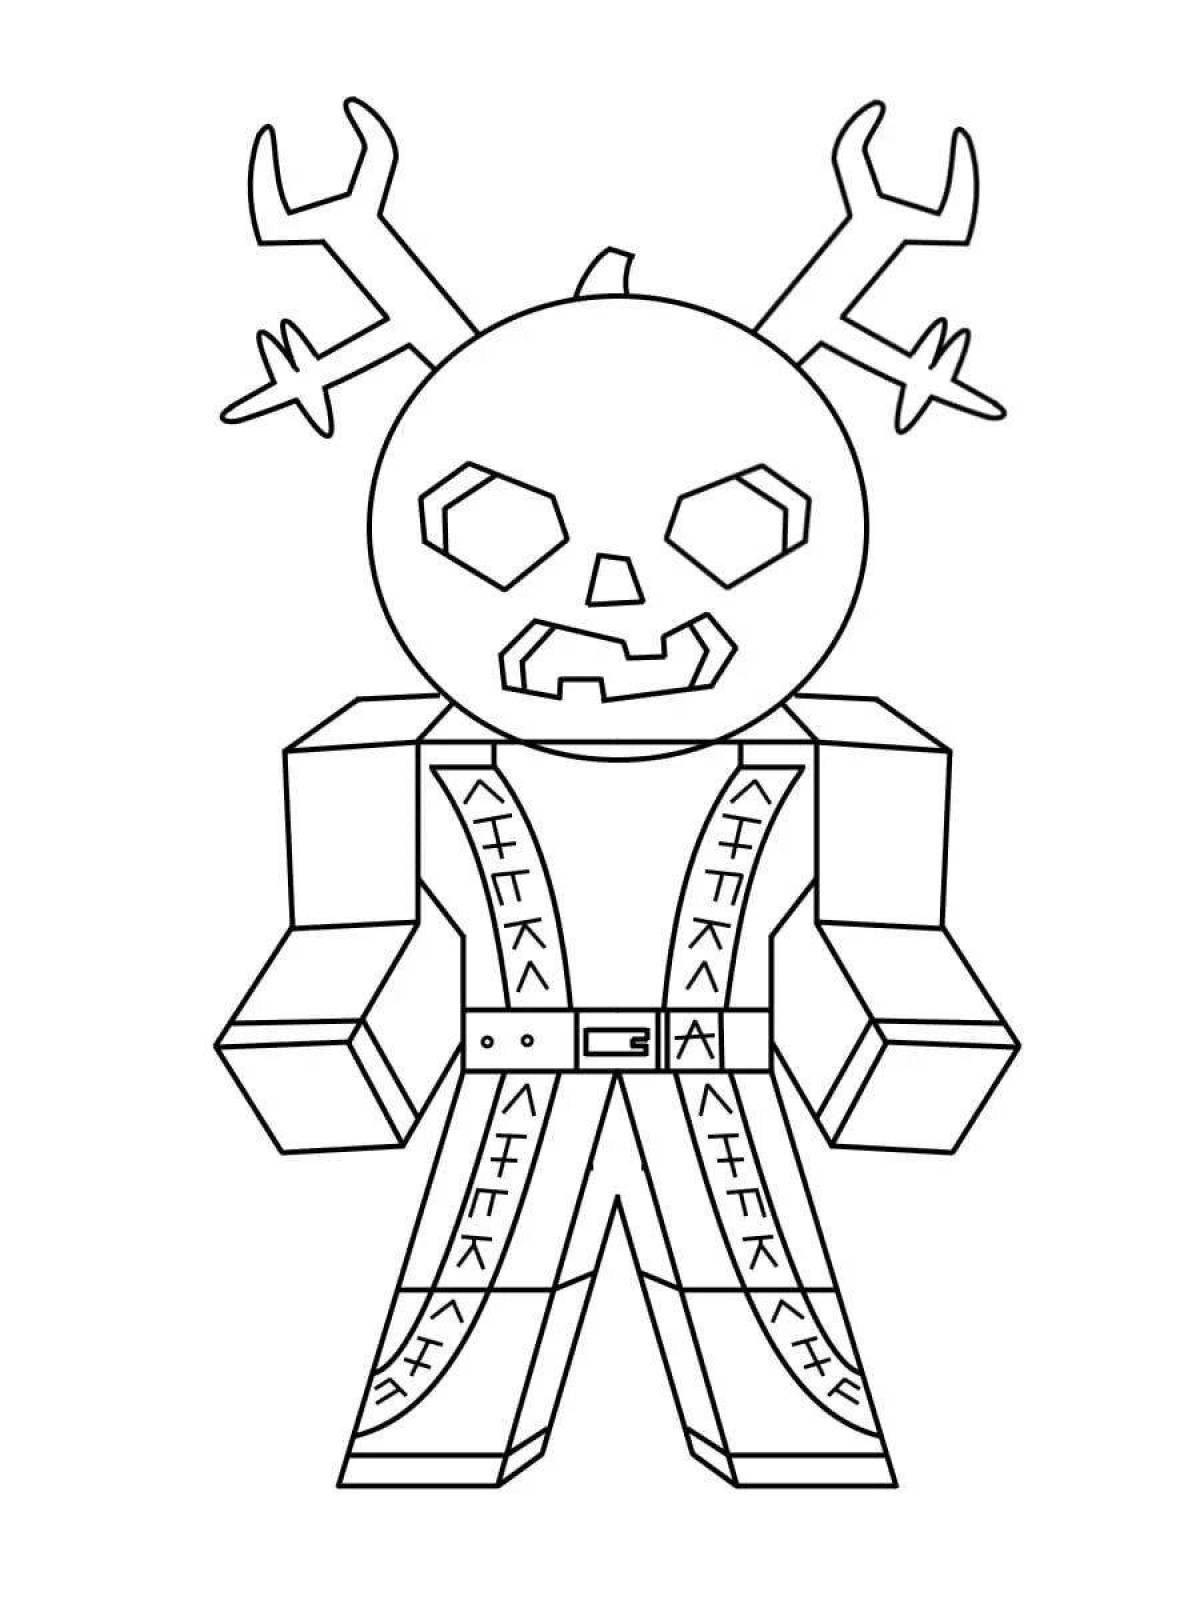 Exciting roblox body coloring page